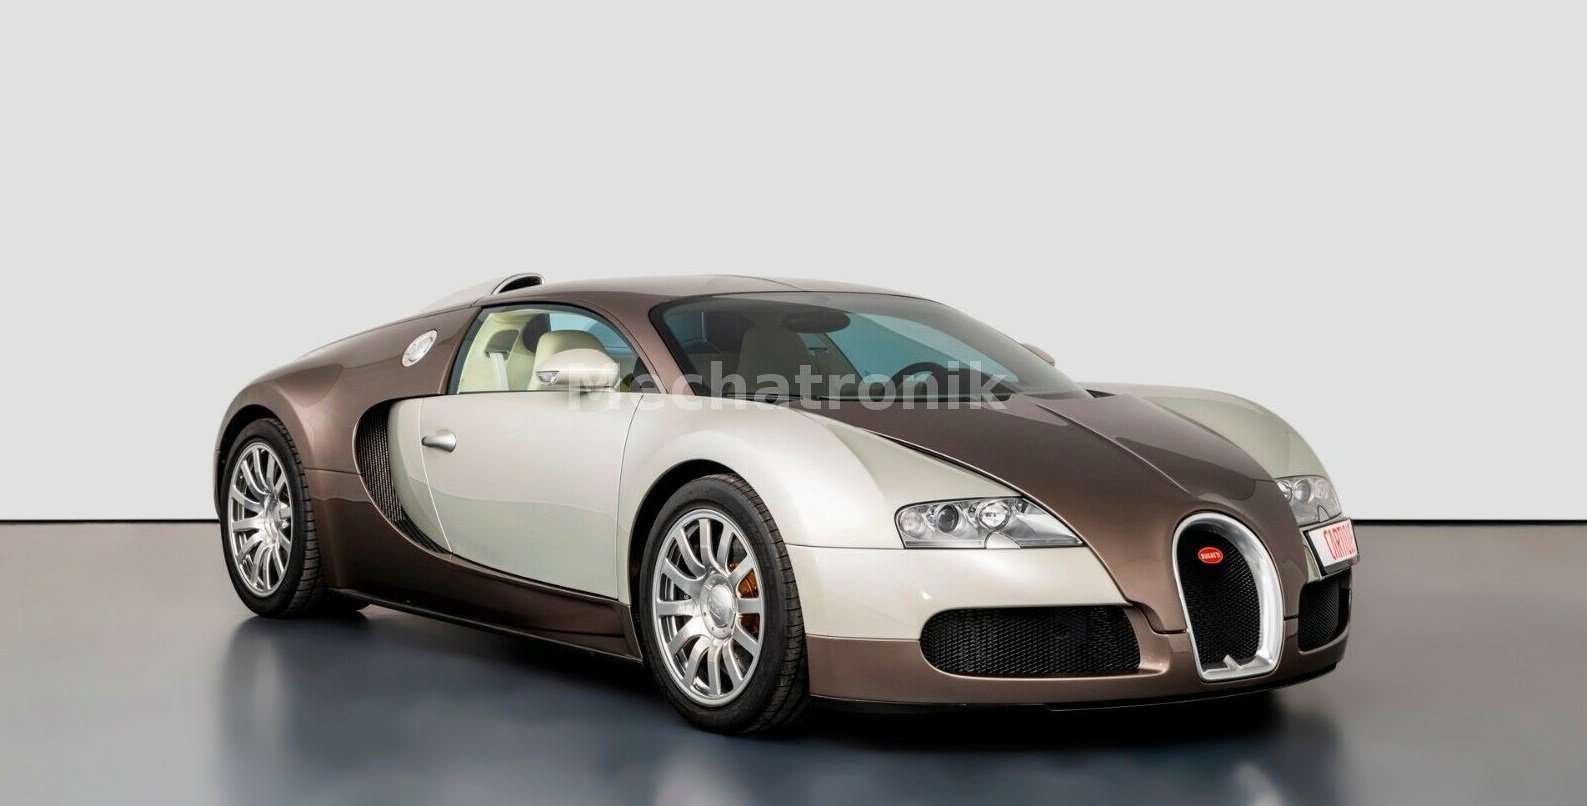 Bugatti Veyron Coupe in Bronze used in Roma - RM for € 1,650,000.-